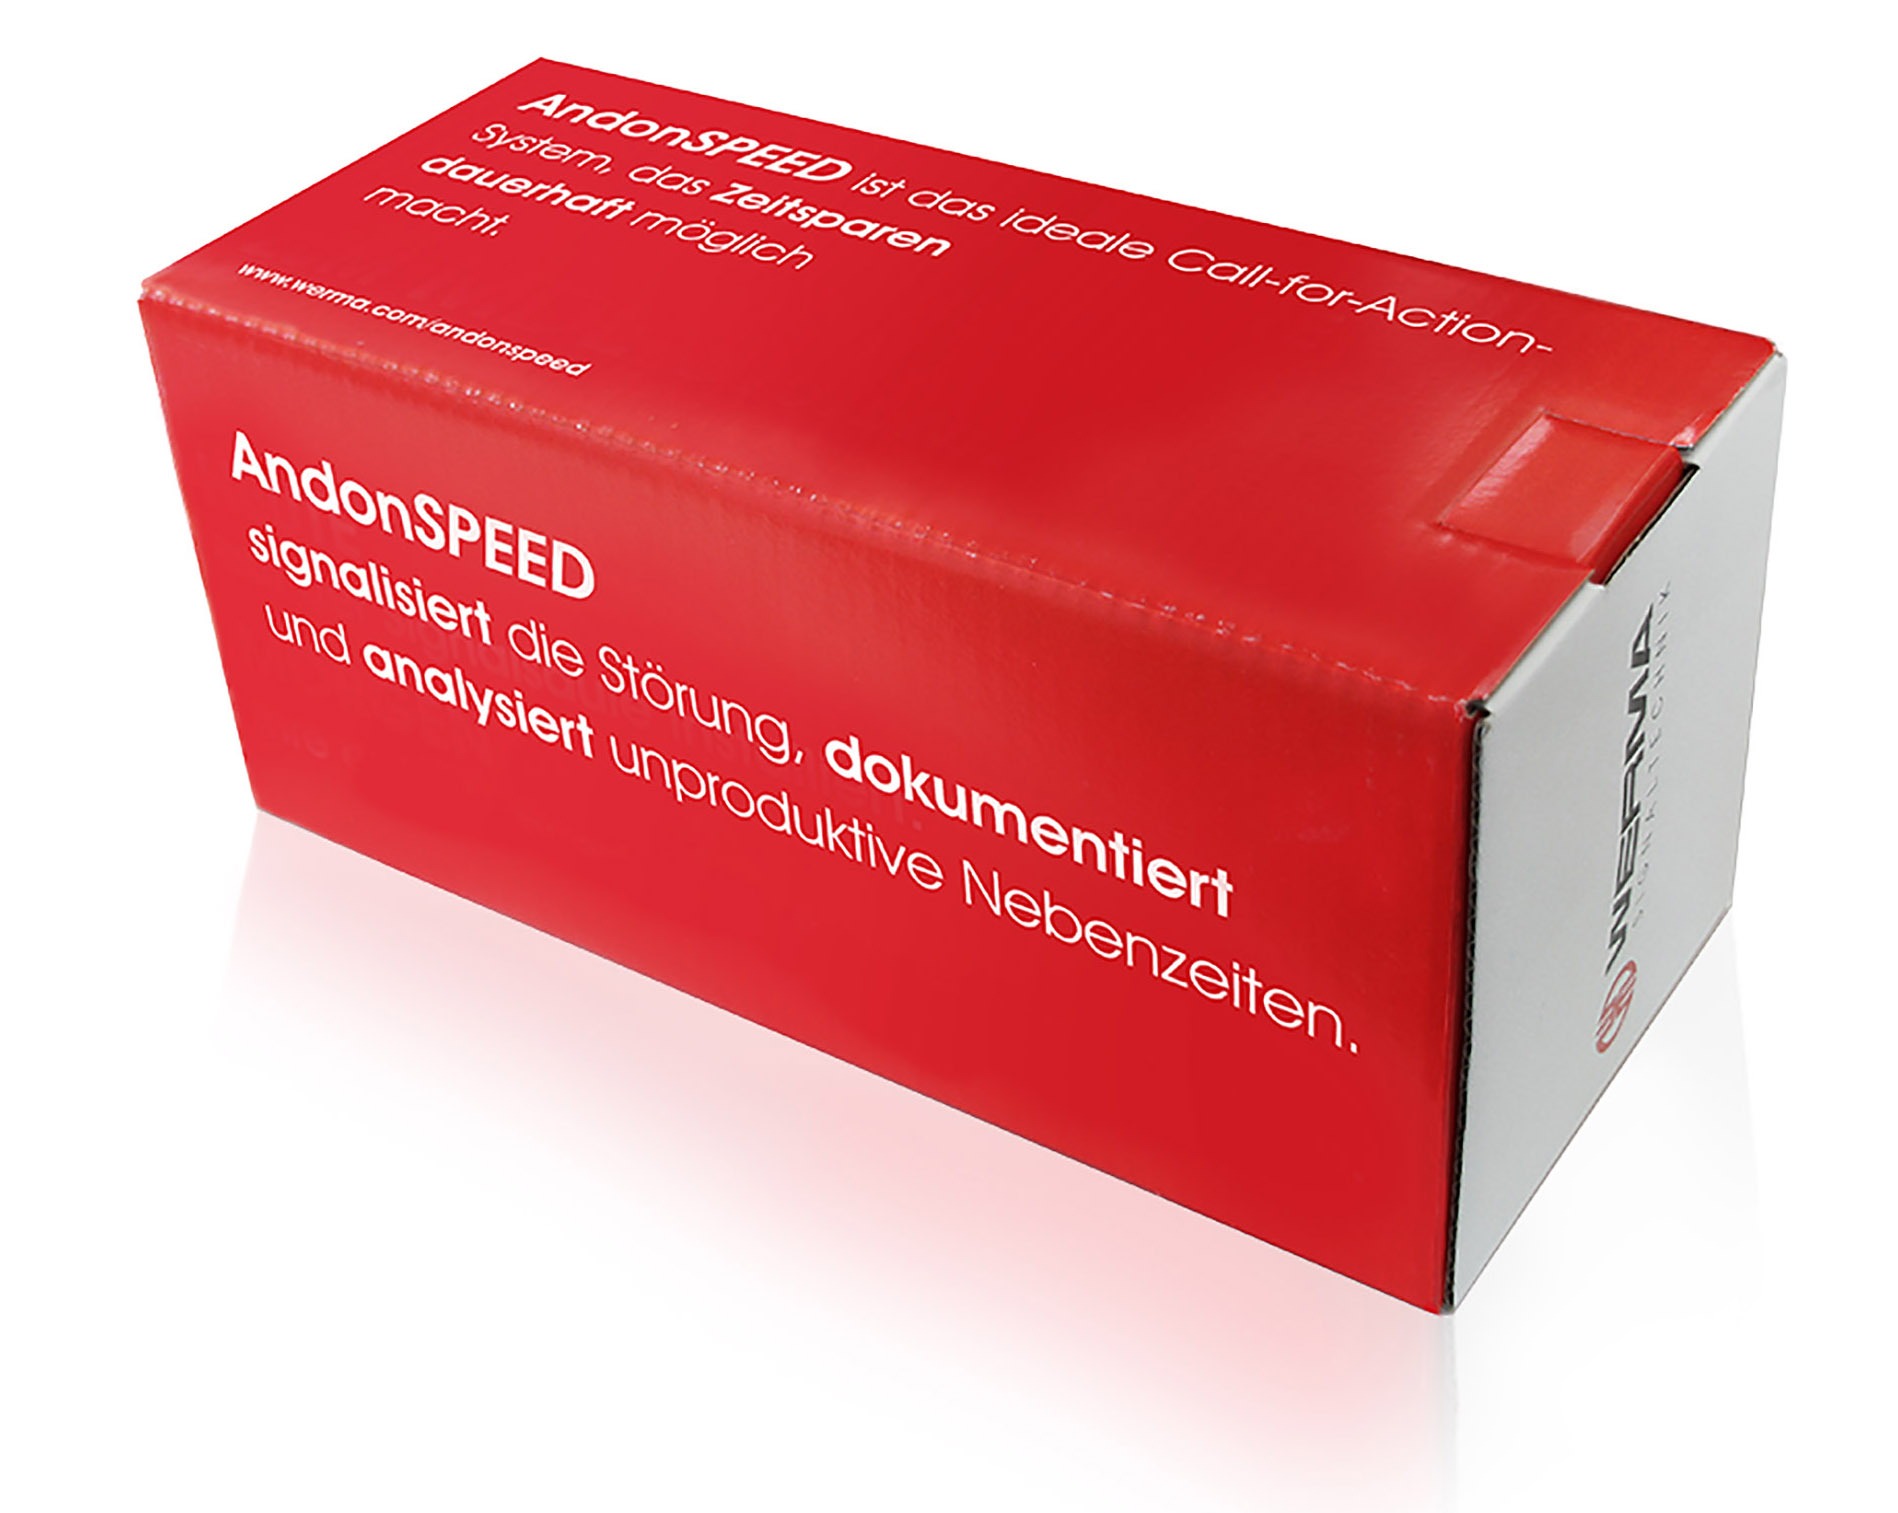 AndonSPEED Testbox